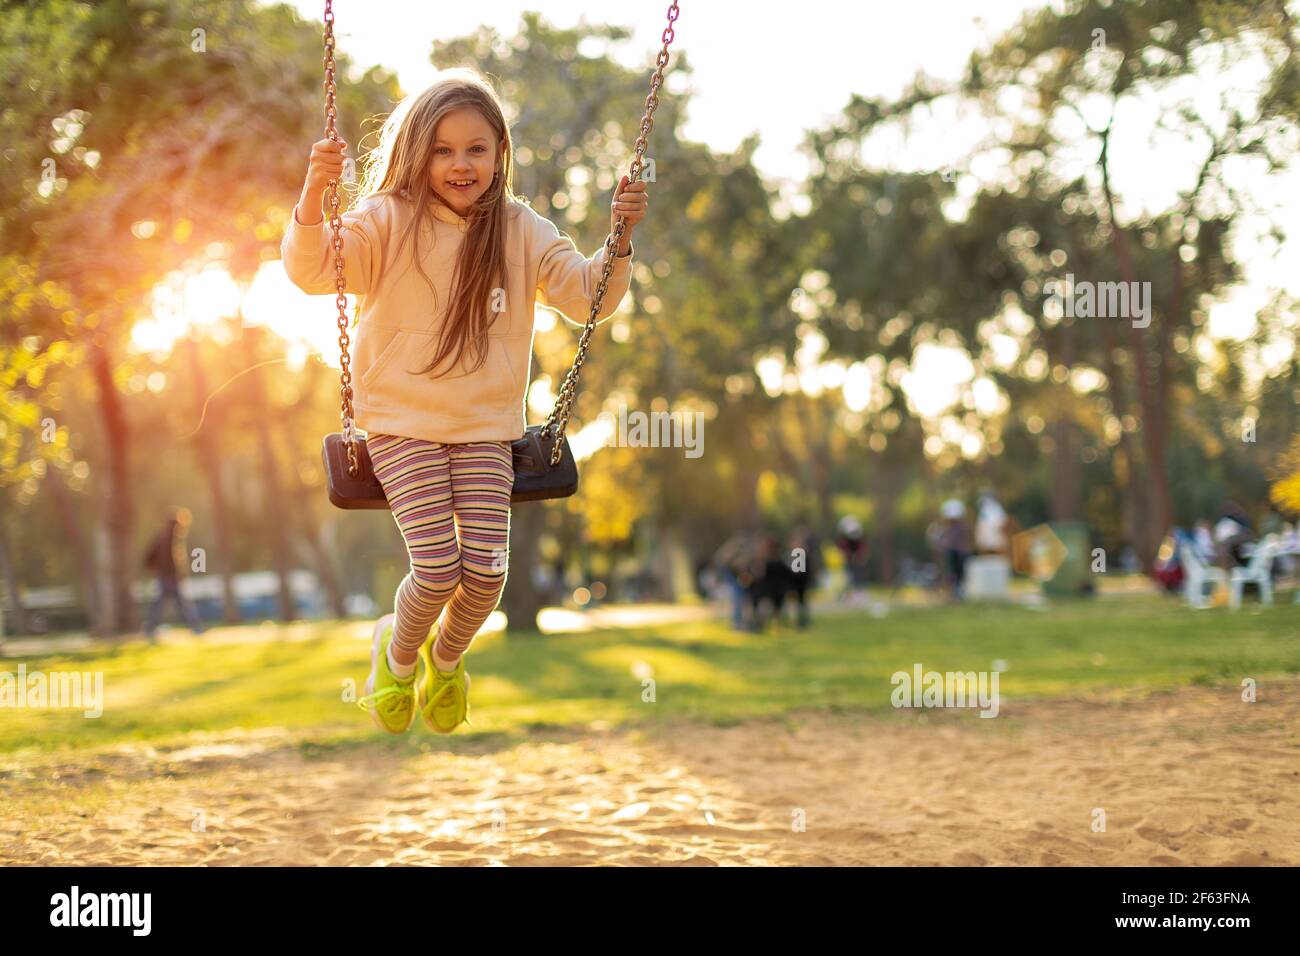 Girl holding chains of swings and swinging on a bright sunny day Stock Photo